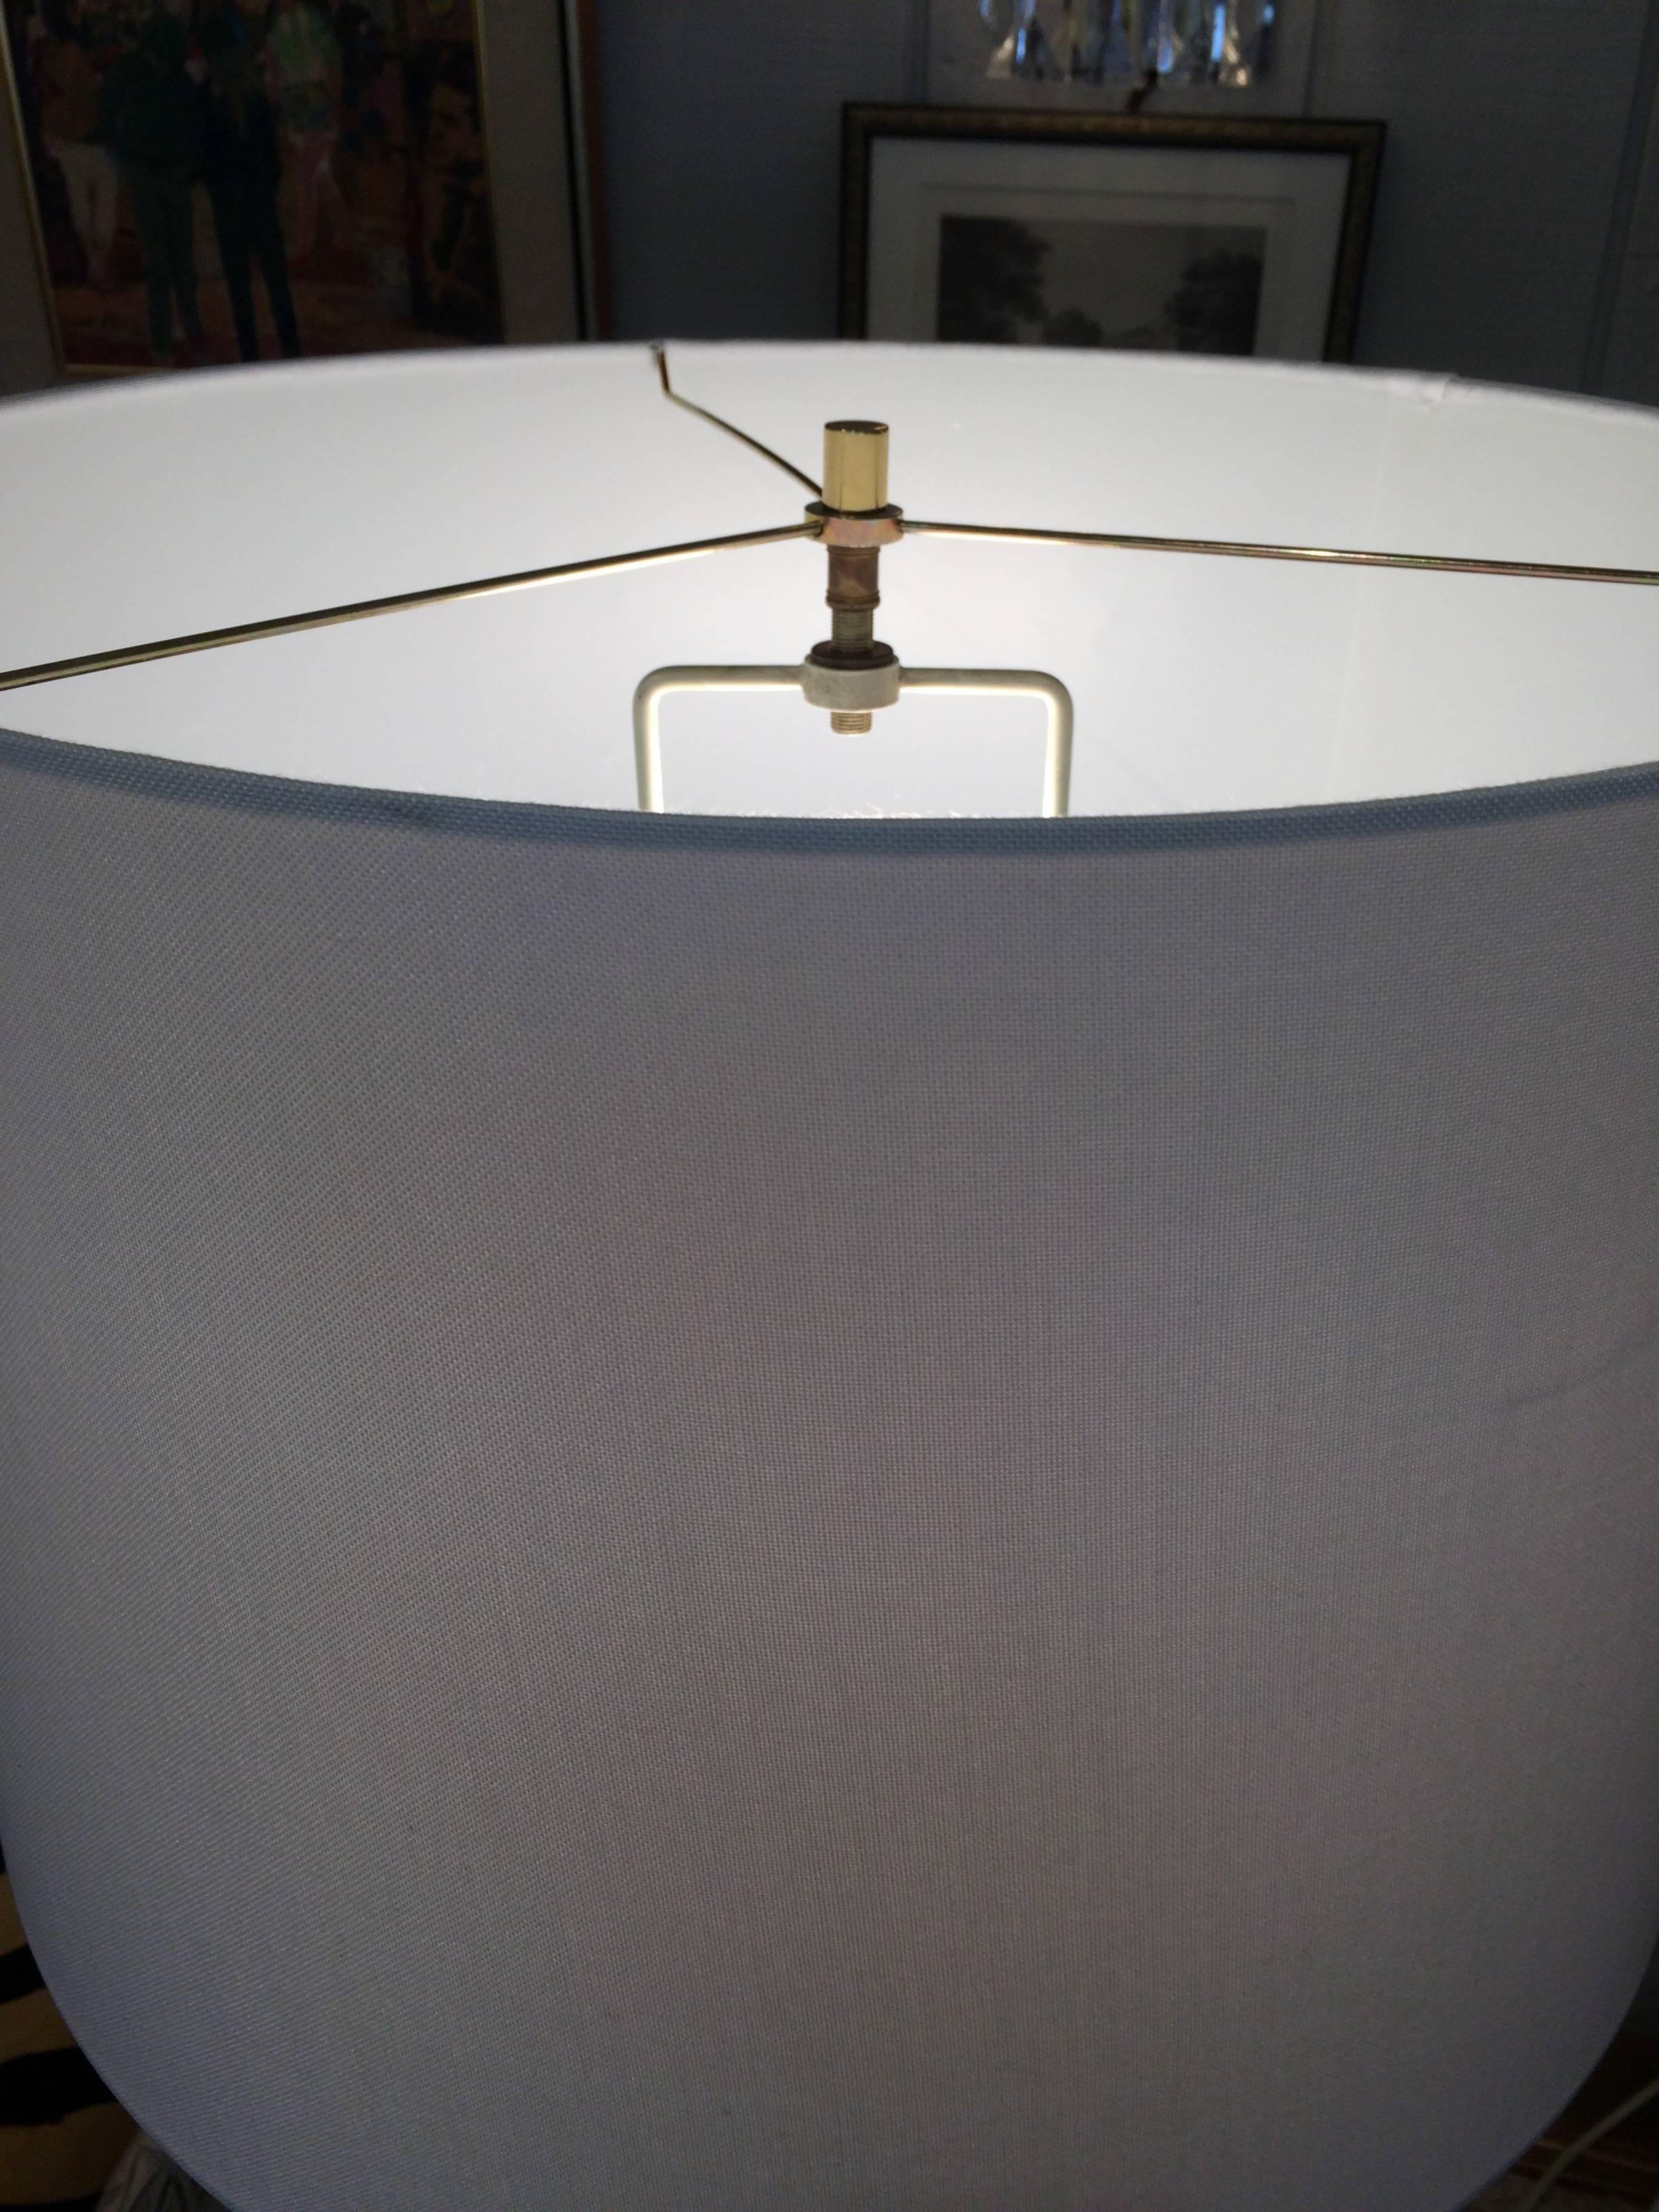 Very stylish Mid-Century Modern floor lamp, Danish inspired, with a wish bonesque shape in teak and brass. In superb mint condition. Can take a three way bulb.
Base is 10 x 10
Note: Matching pair of table lamps are available.